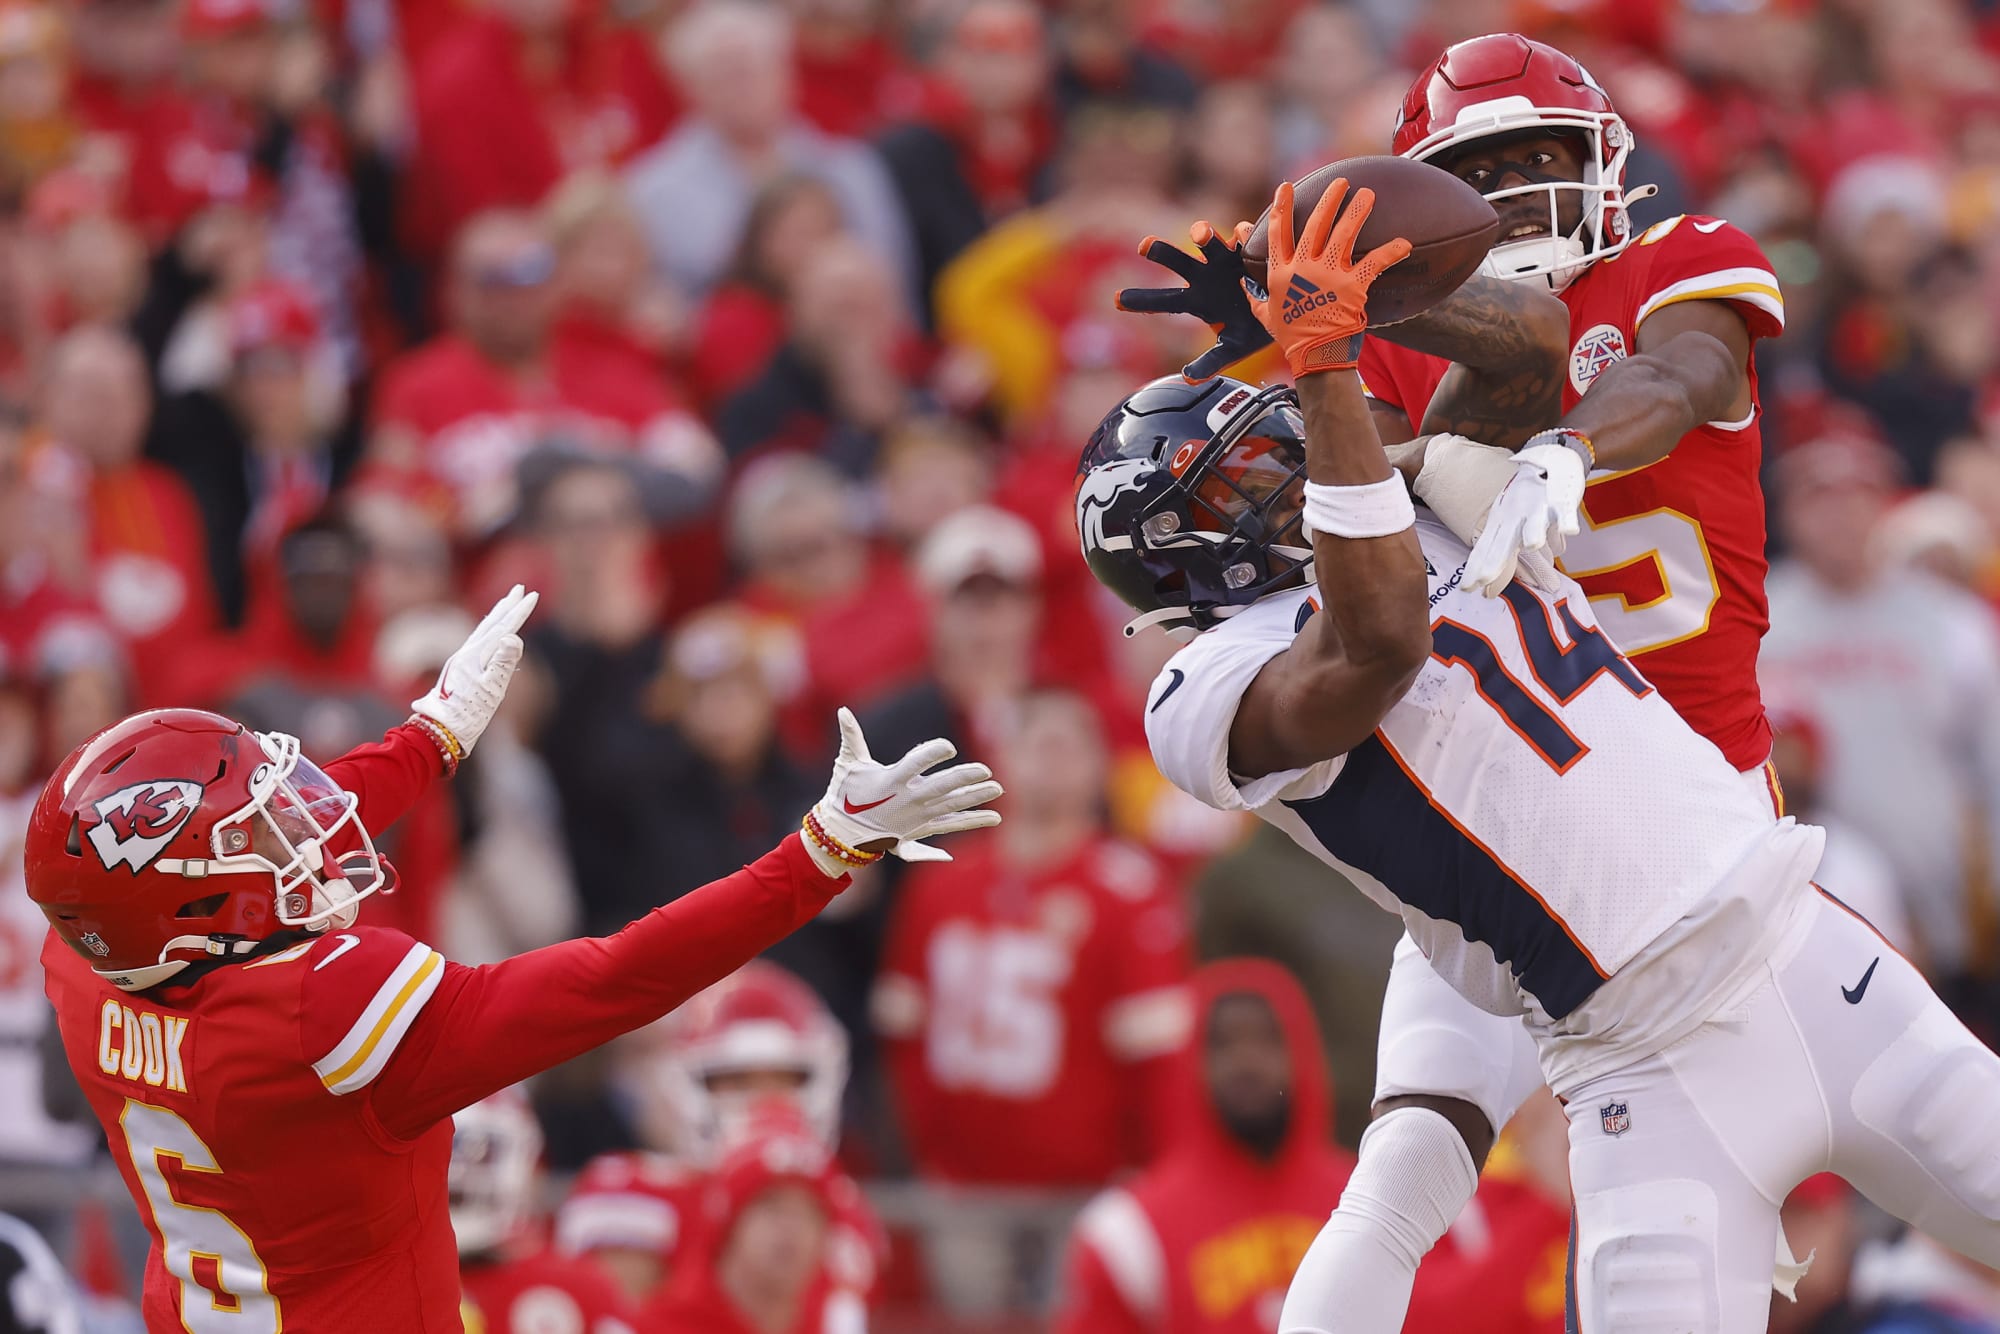 Horrendous call alters game for Broncos in 27-24 loss to Chiefs